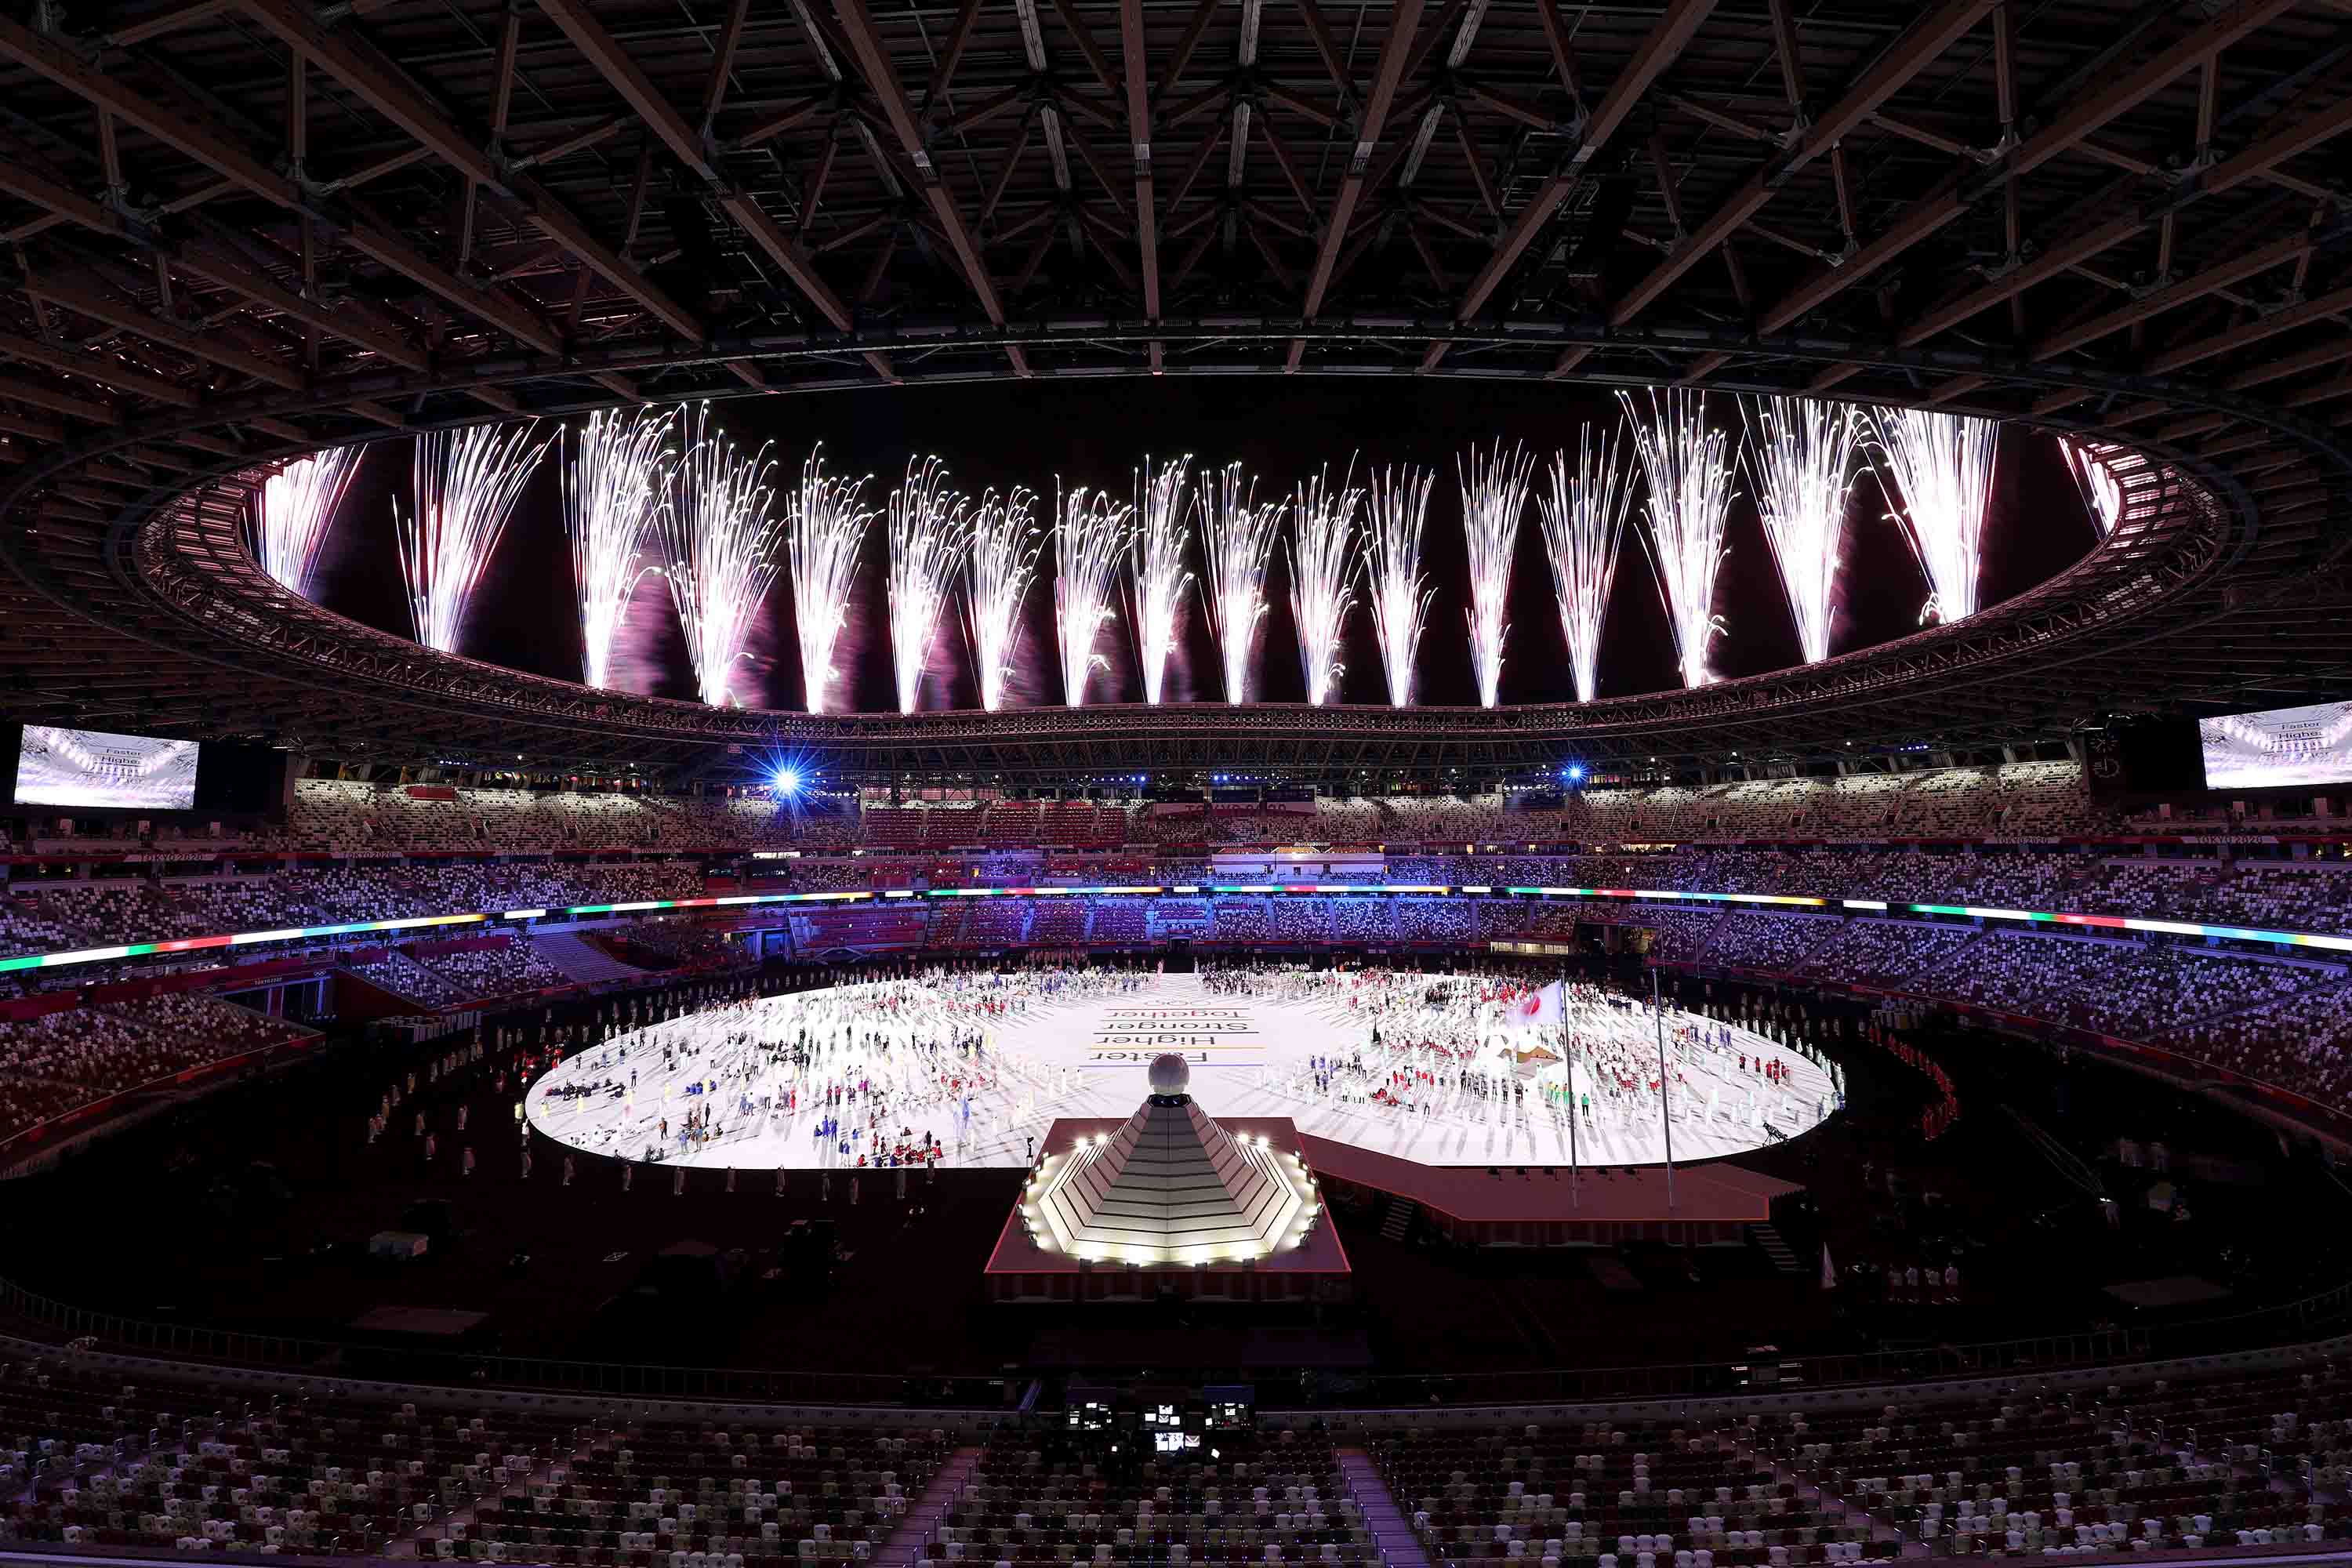 A general view shows inside the Olympic Stadium as fireworks are set off.